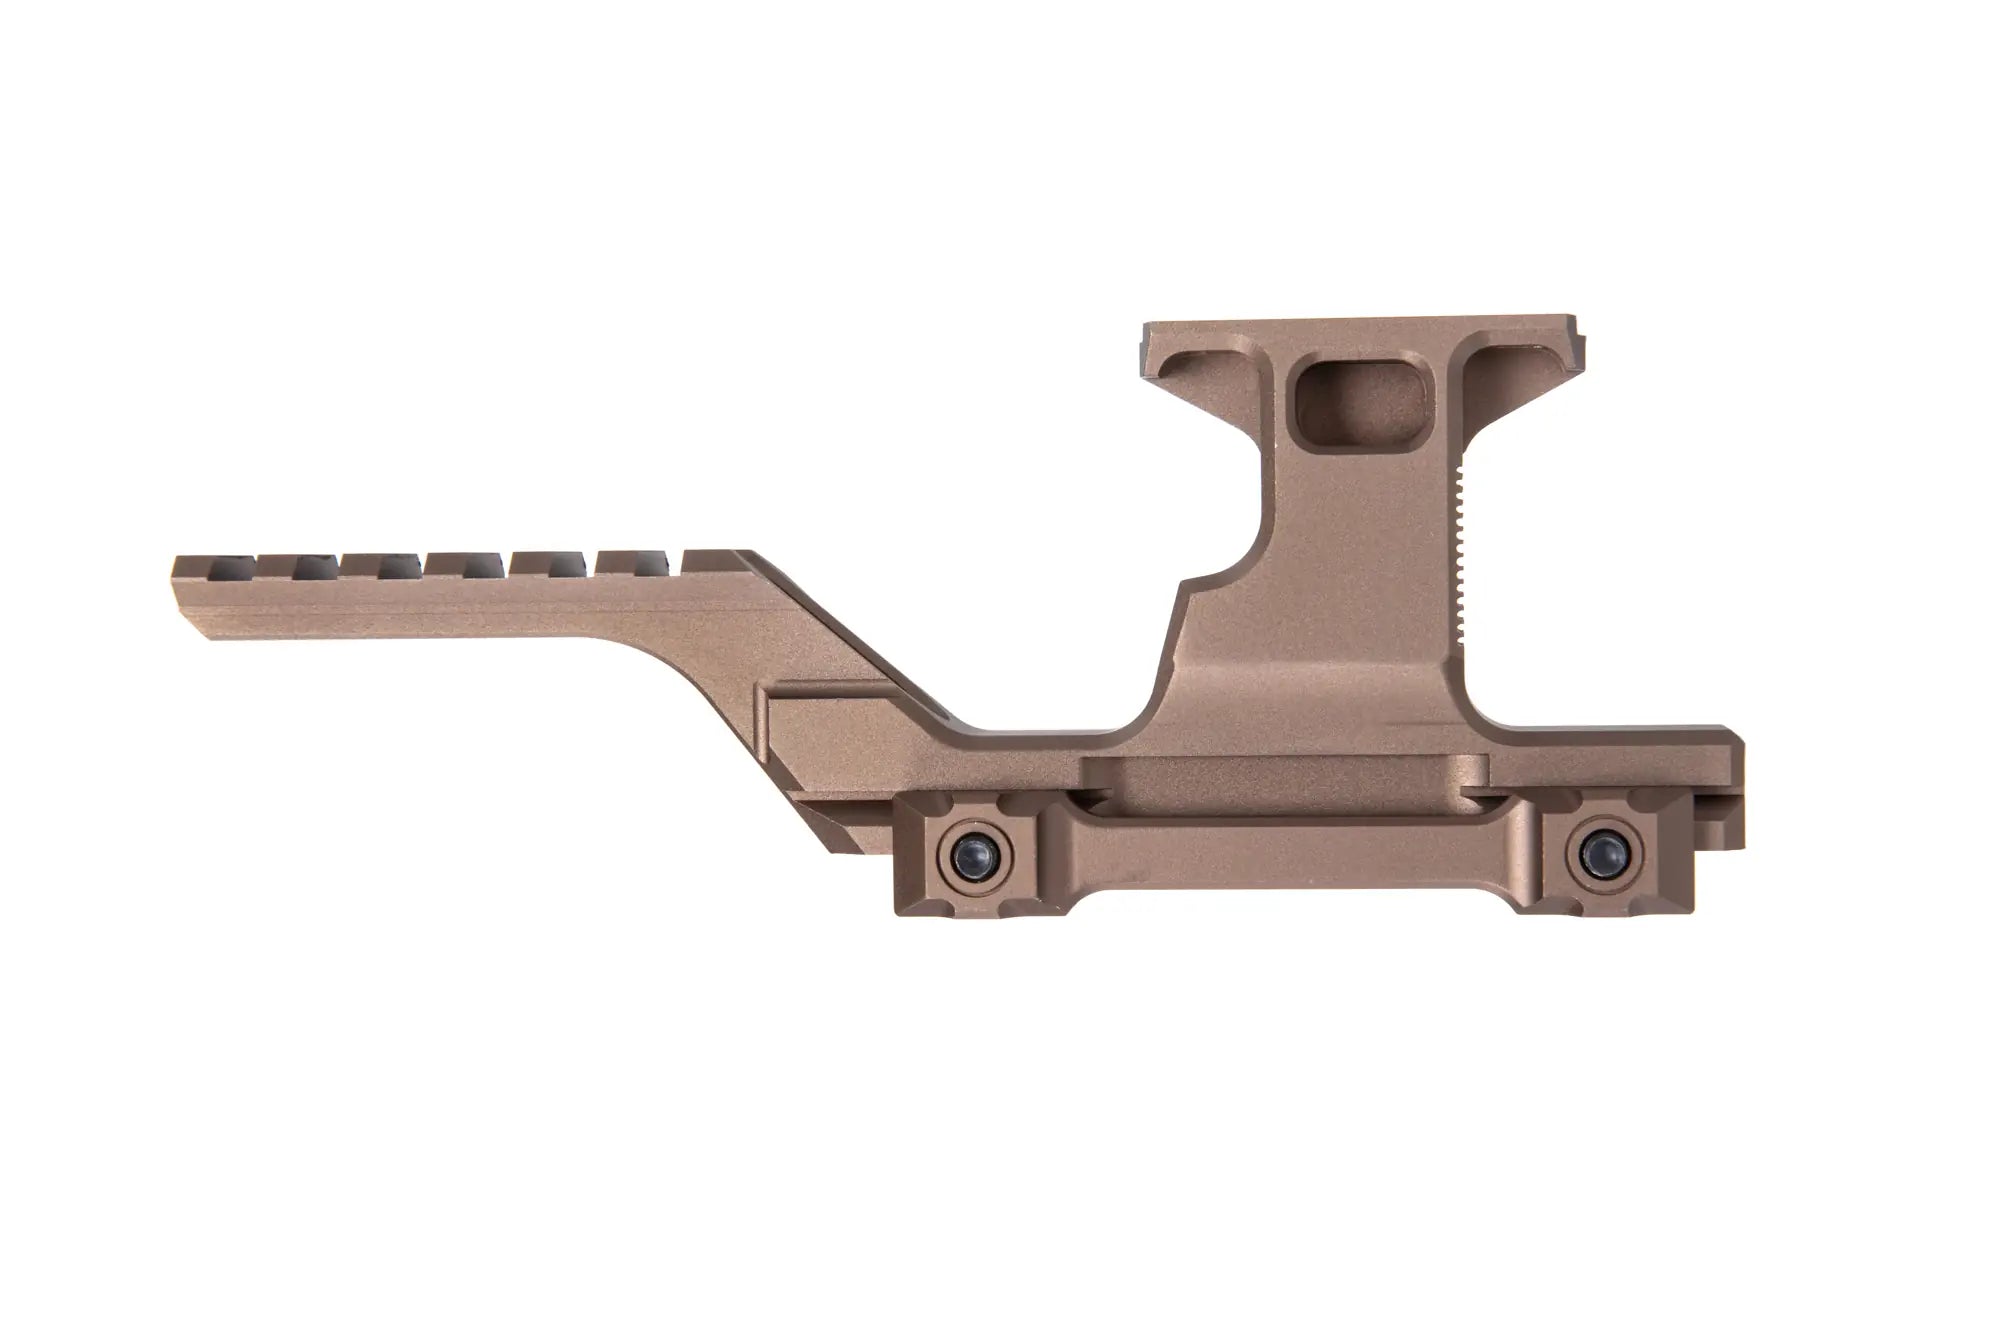 WADSN high mount for T1/T2 and PEQ FDE collimators-3